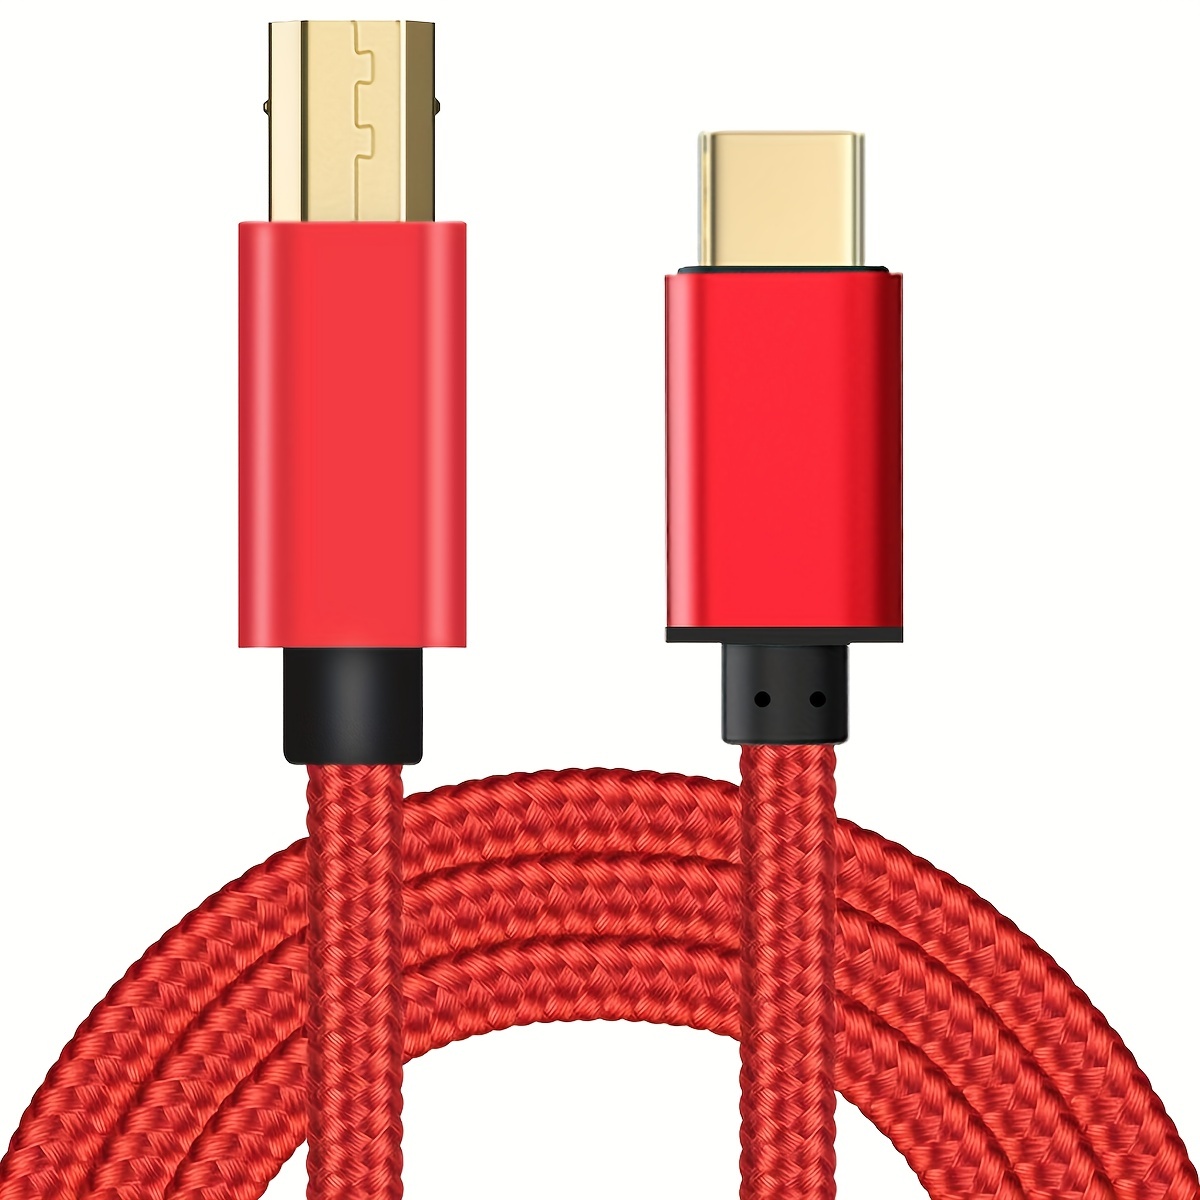 USB B MIDI Cable for Instruments 3 FT, Ancable USB A to USB B cable Co